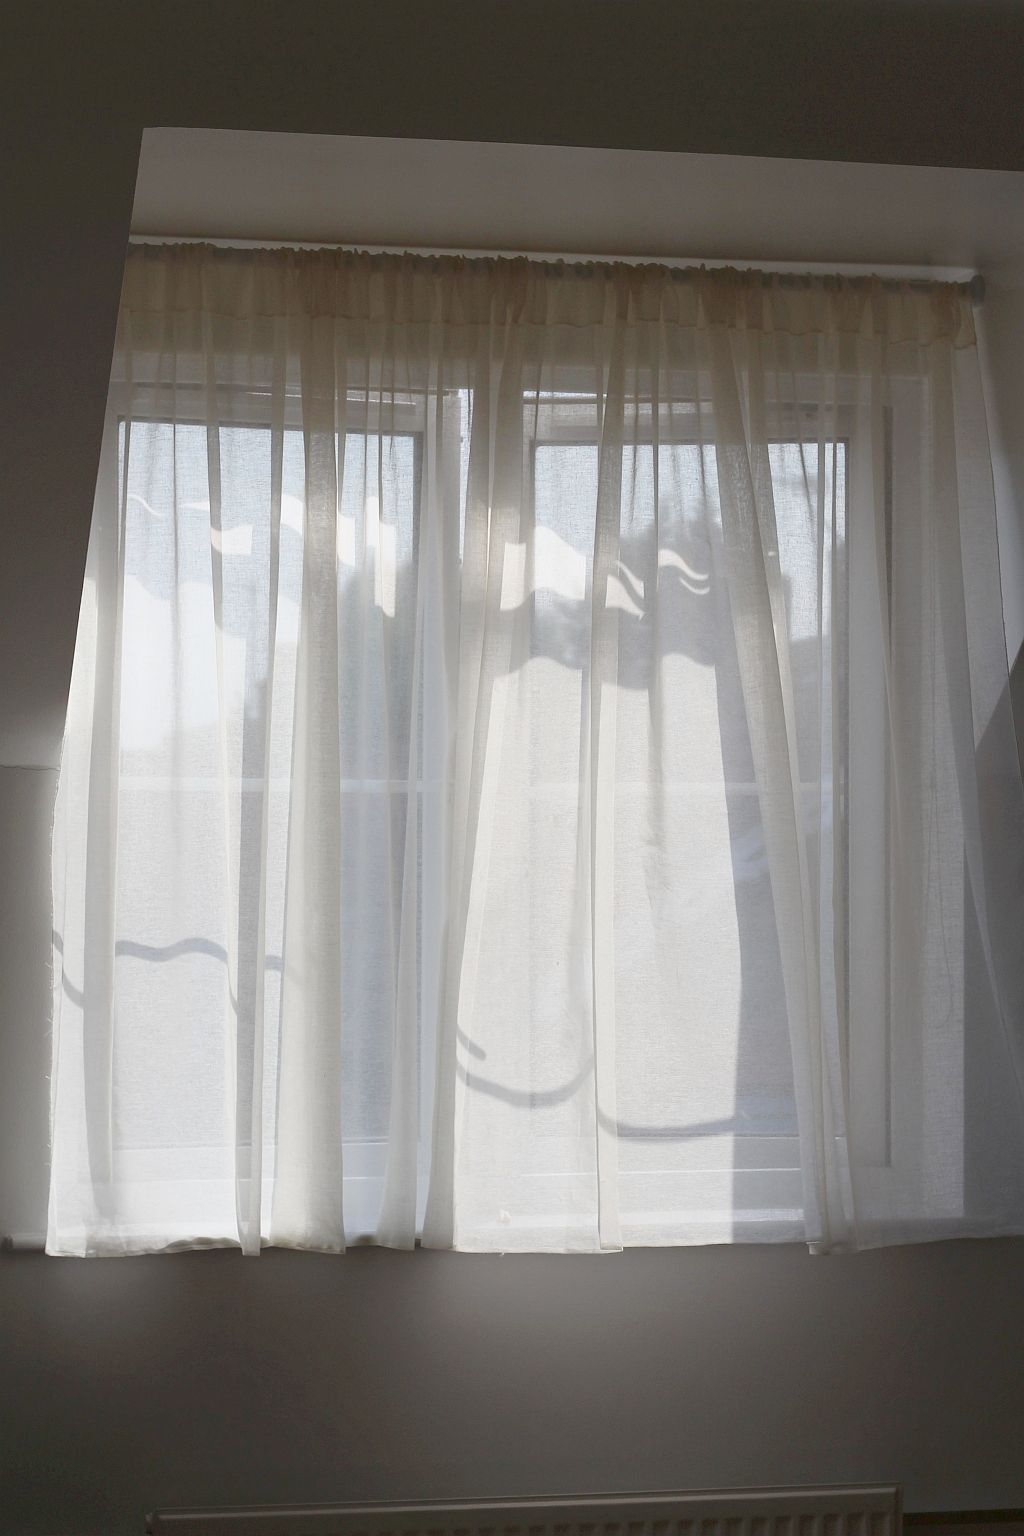 Muslin curtains with a slot